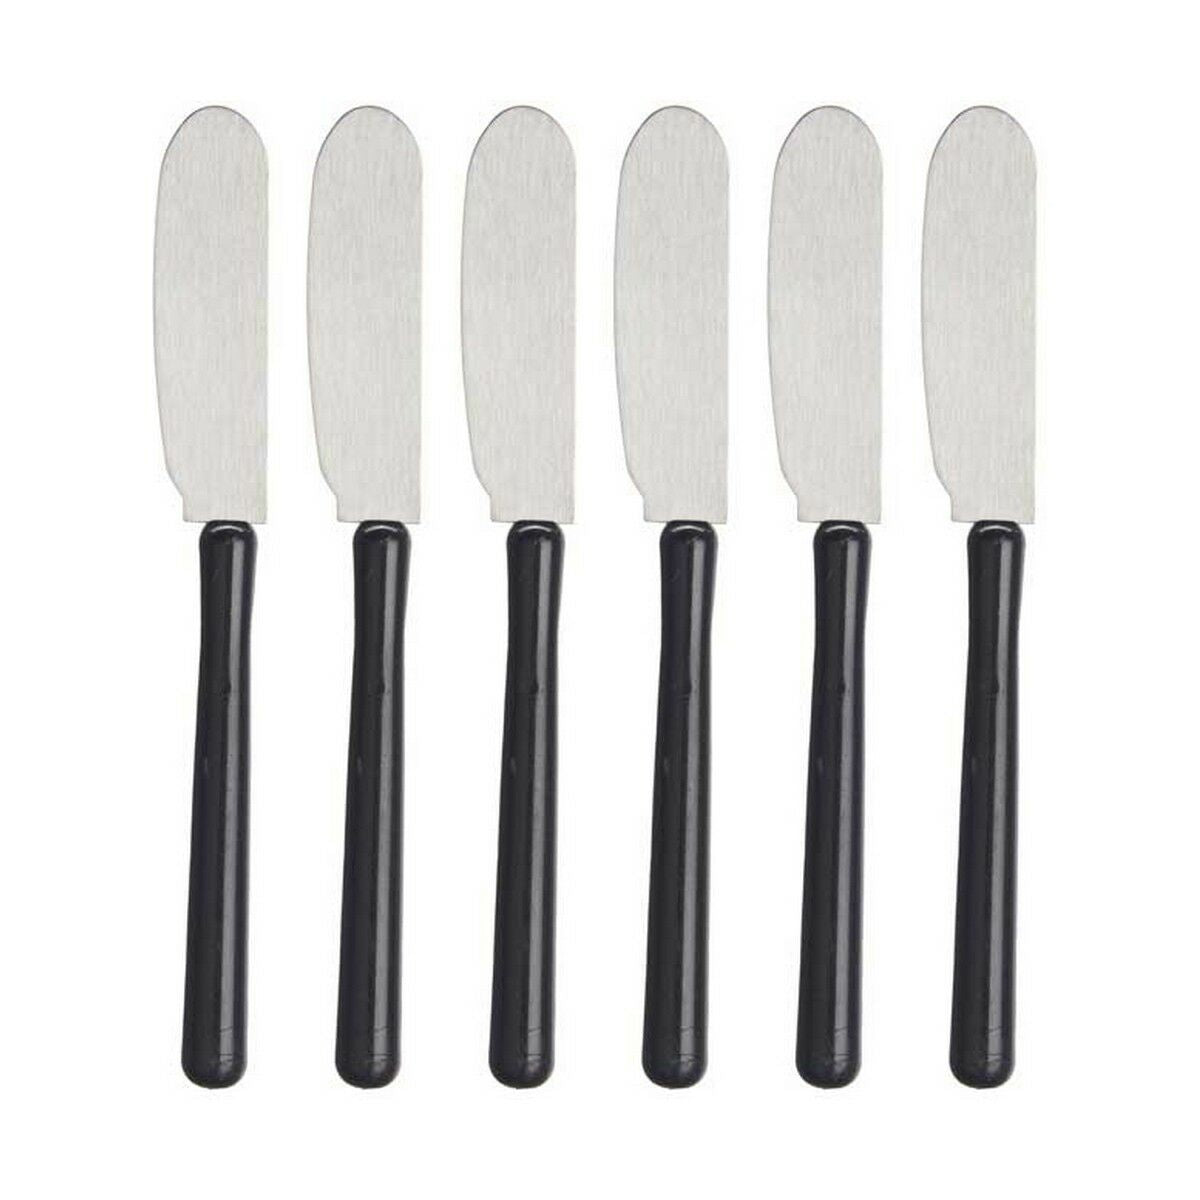 Butter Knife Black Silver Stainless steel Plastic Butter Knife (12 Units)